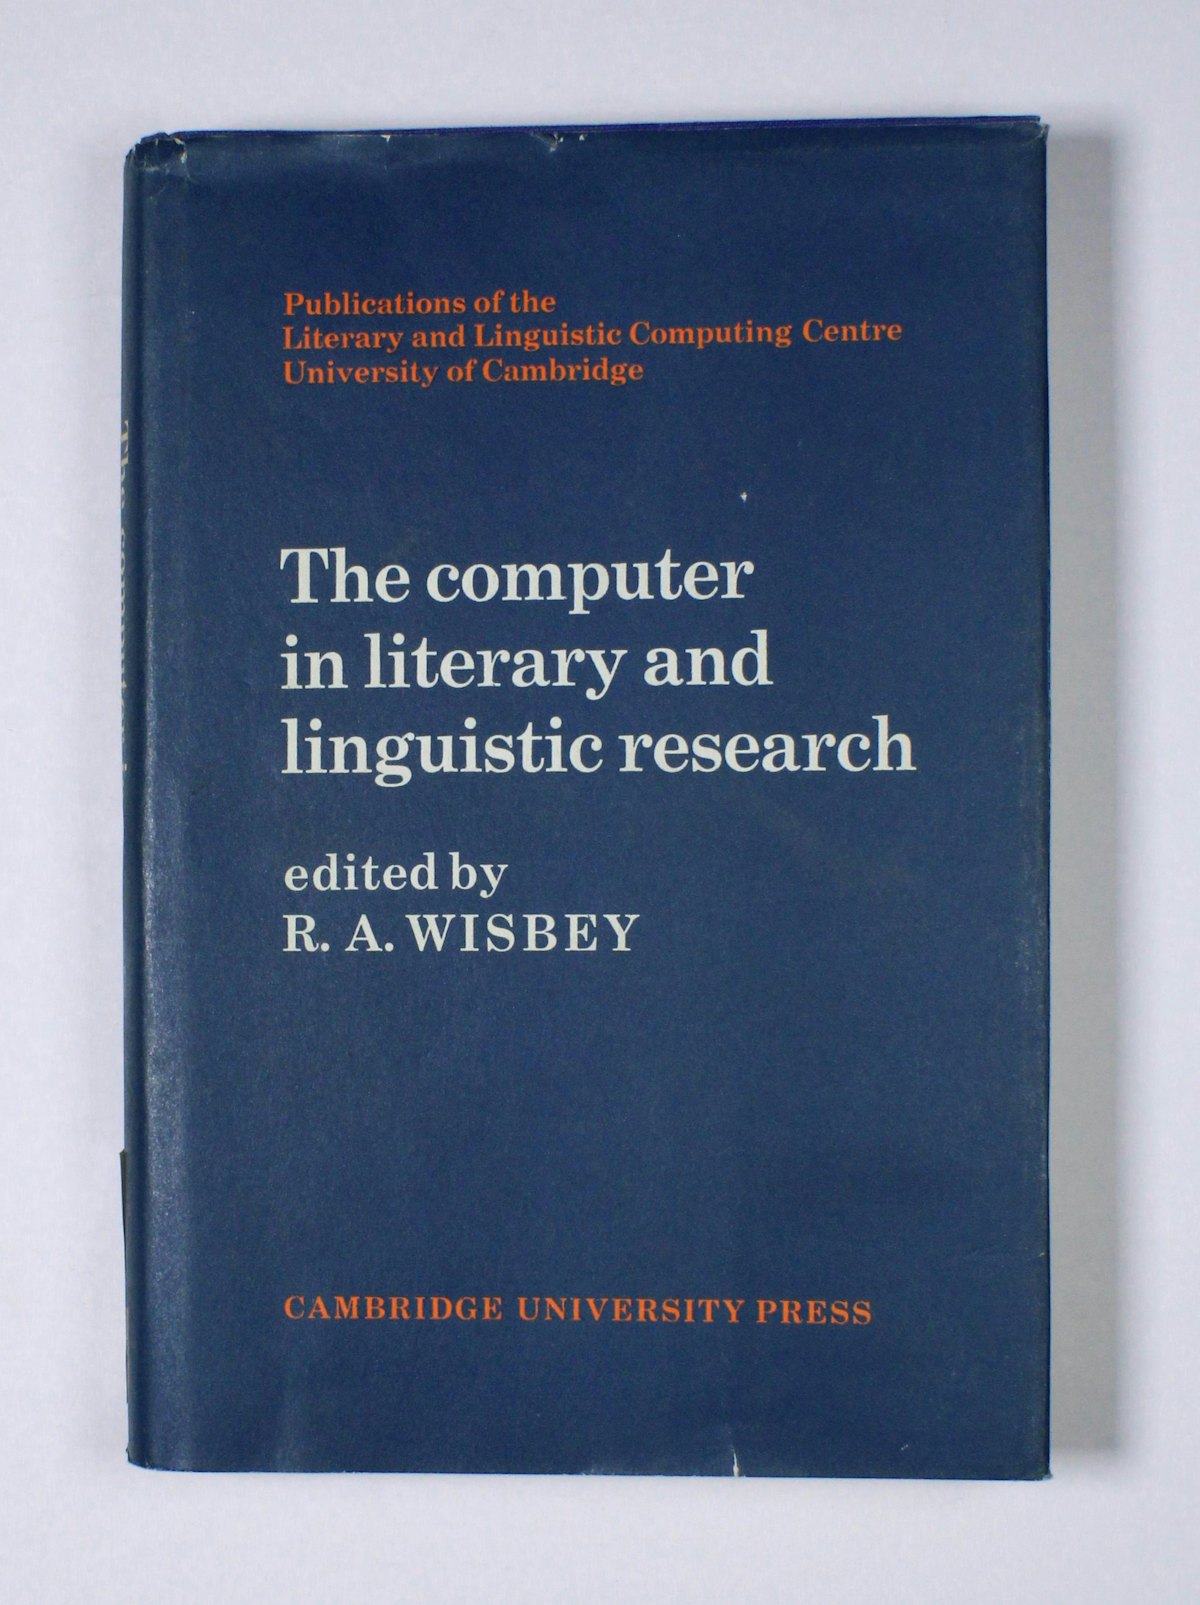 The Computer in Literary and Linguistic Research: Papers from a Cambridge Symposium